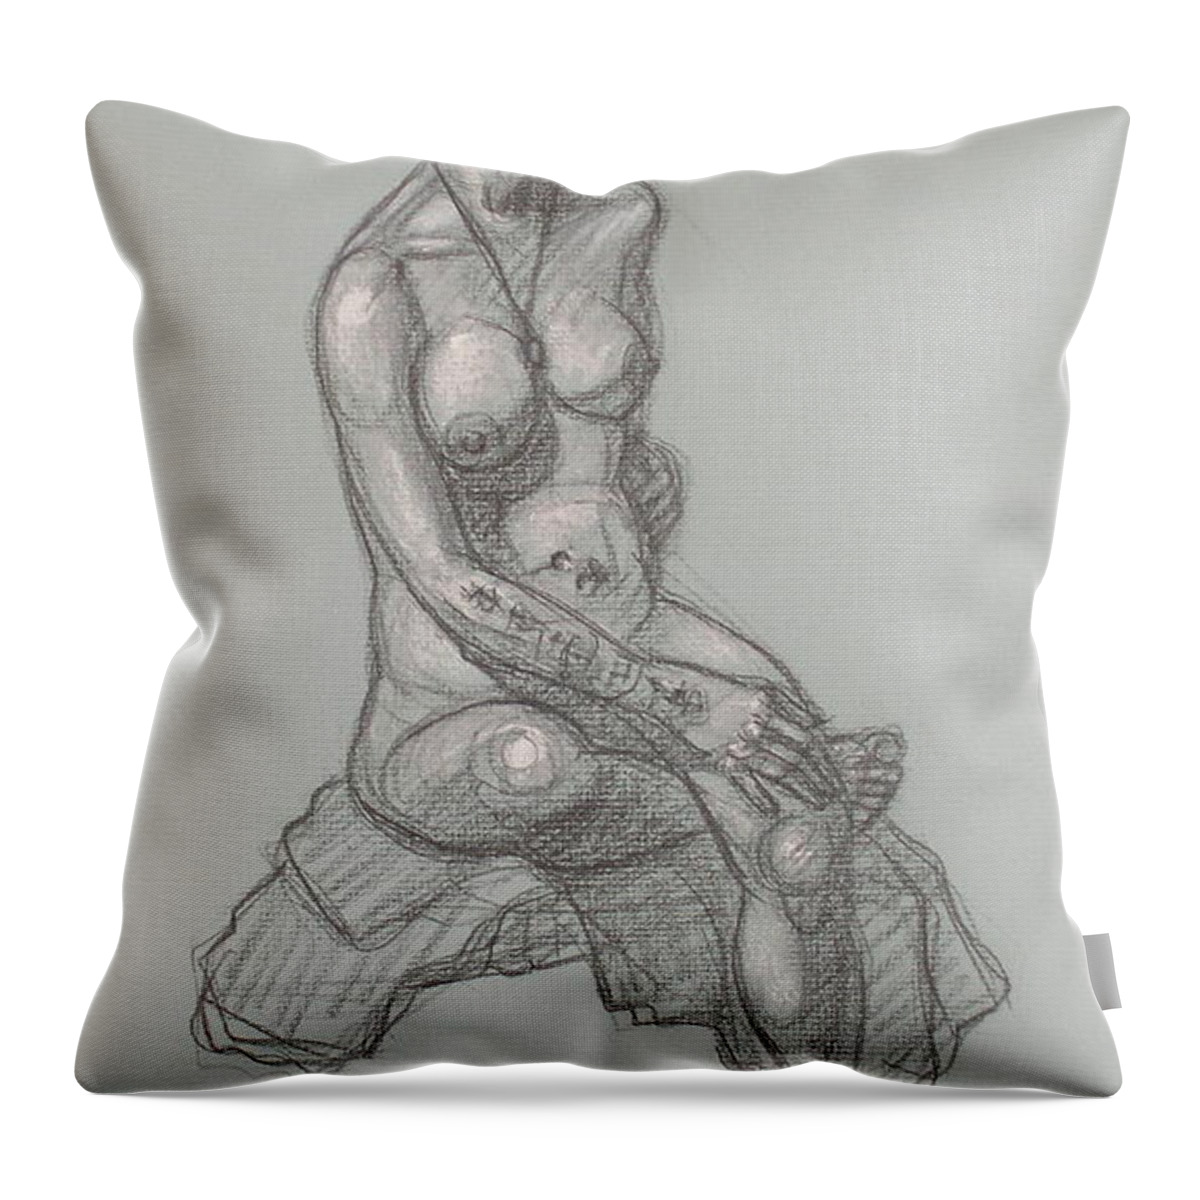 Realism Throw Pillow featuring the drawing Angela Hair Up by Donelli DiMaria